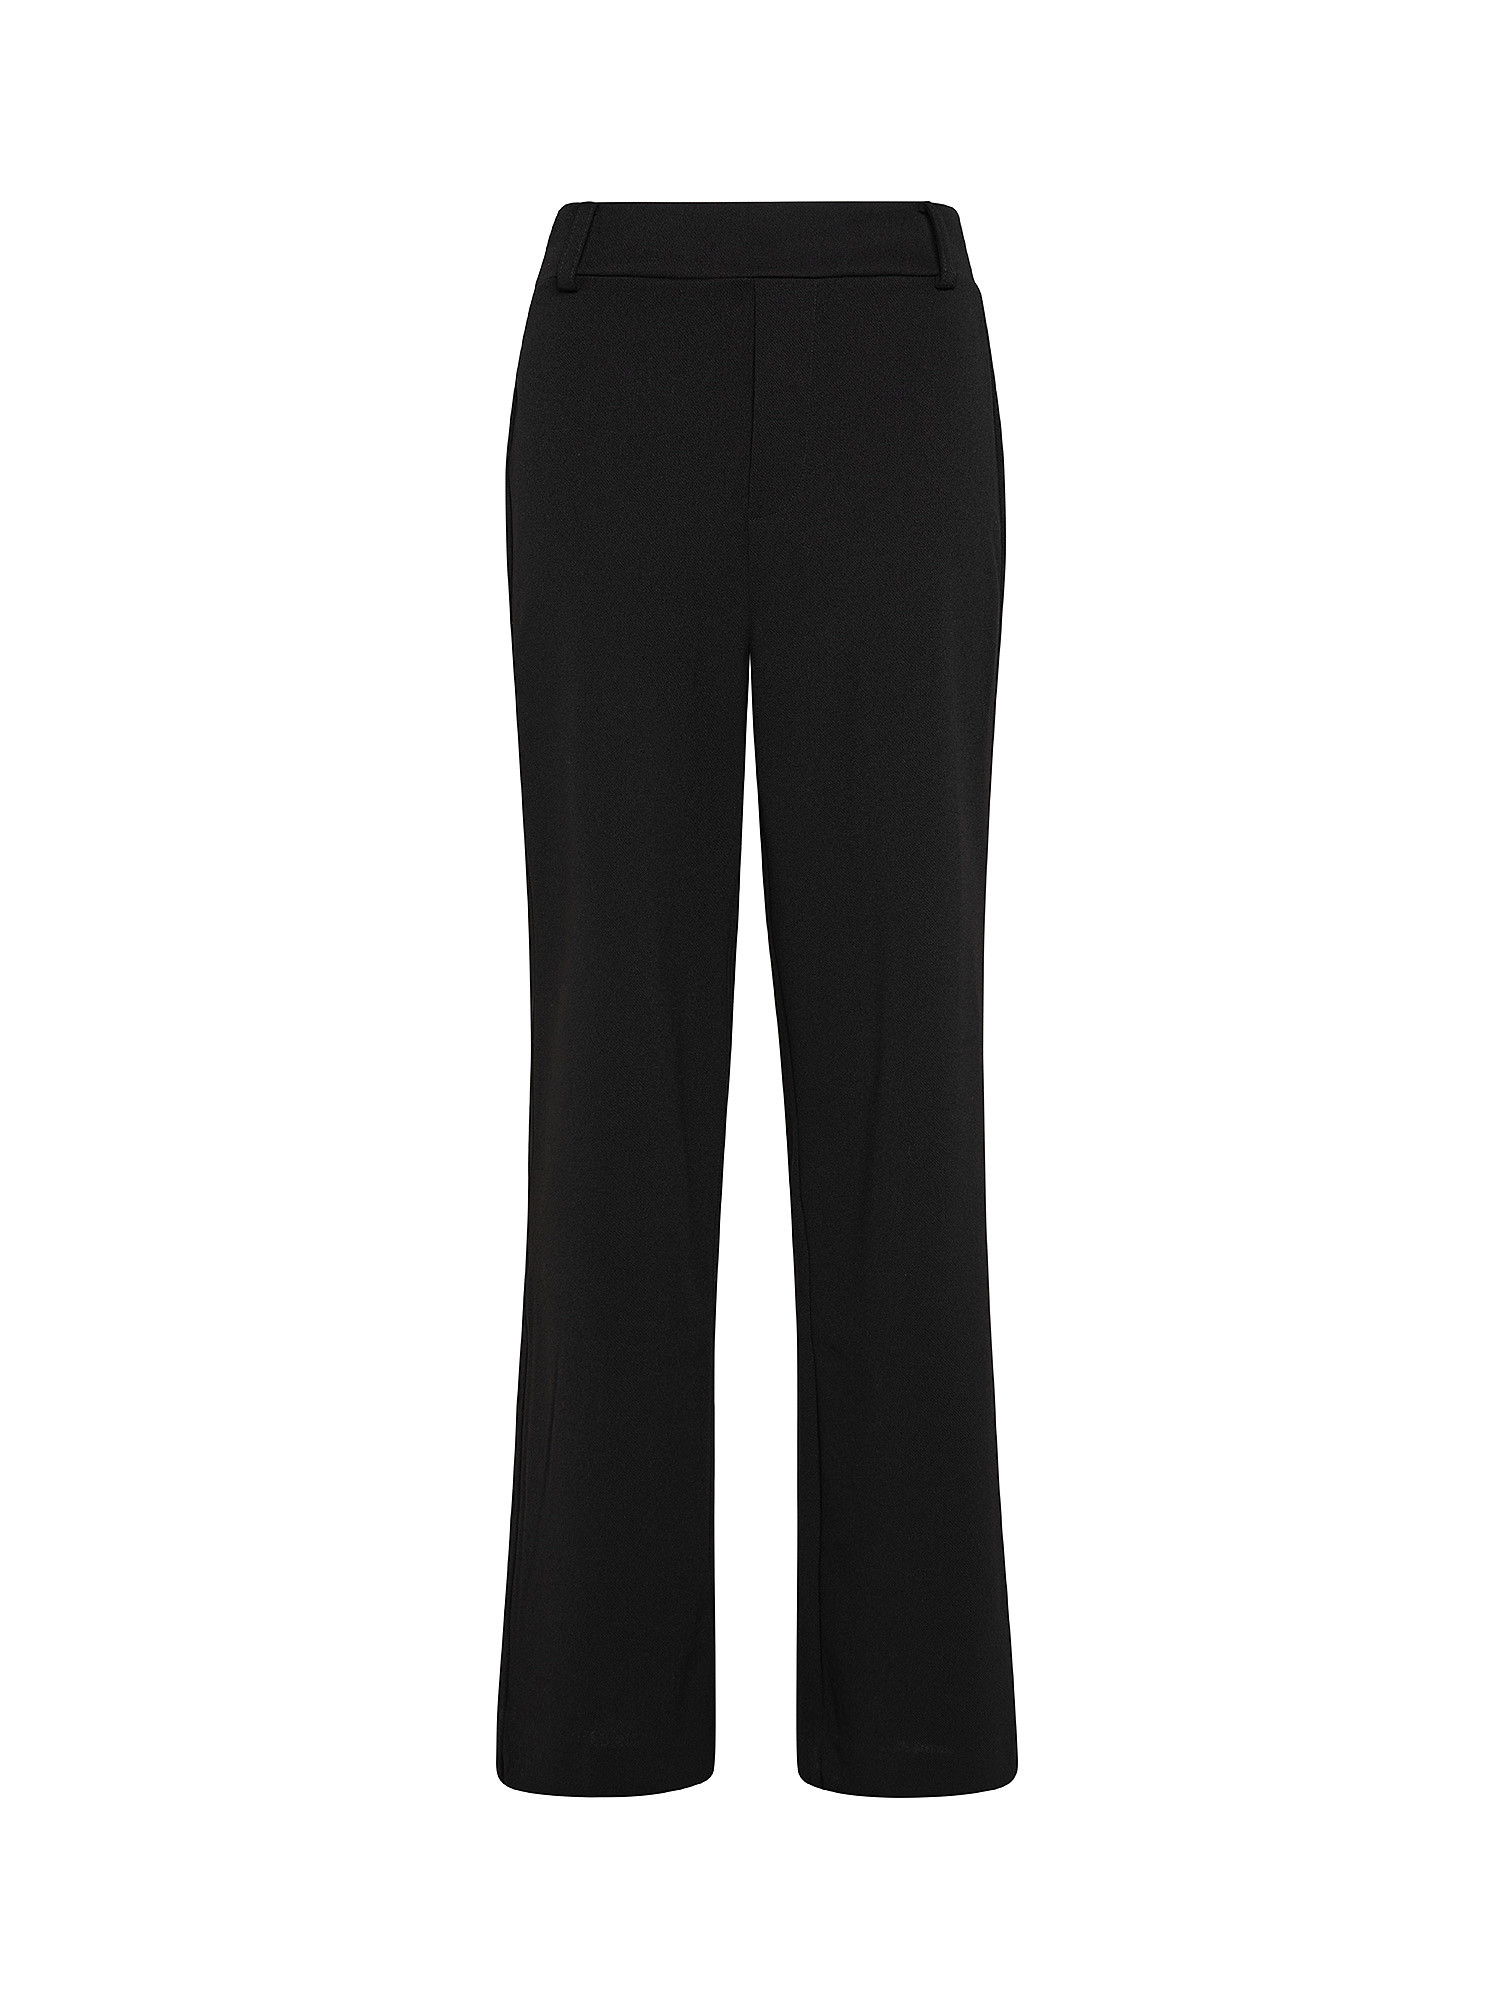 Trousers with elastic, Black, large image number 0